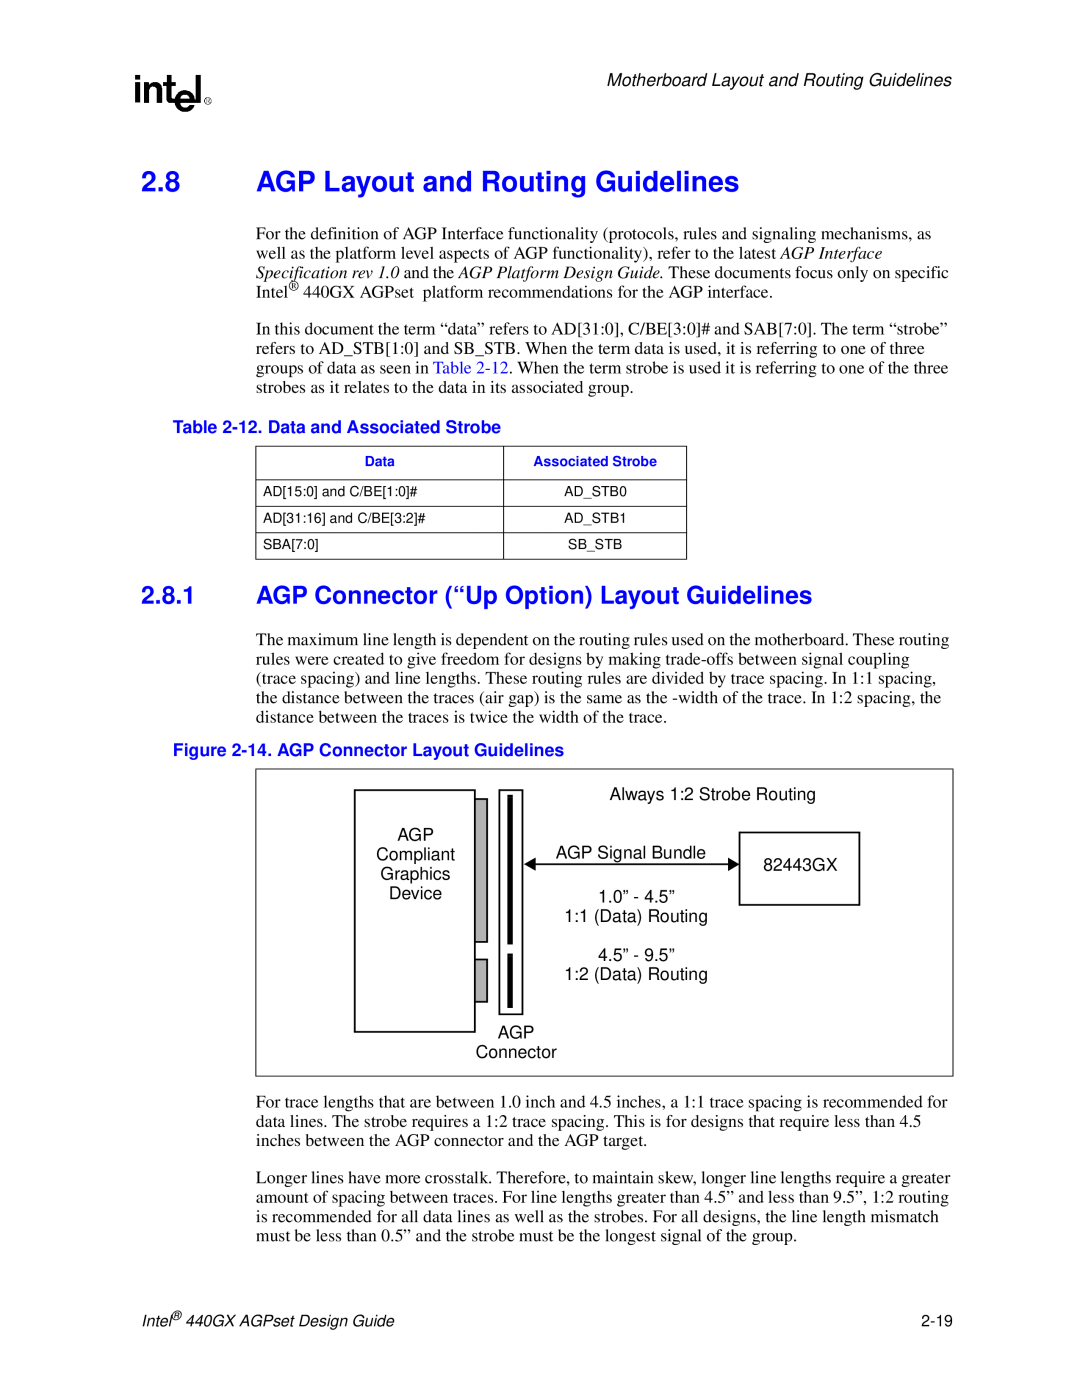 Intel 440GX AGP Layout and Routing Guidelines, AGP Connector “Up Option Layout Guidelines, 12. Data and Associated Strobe 